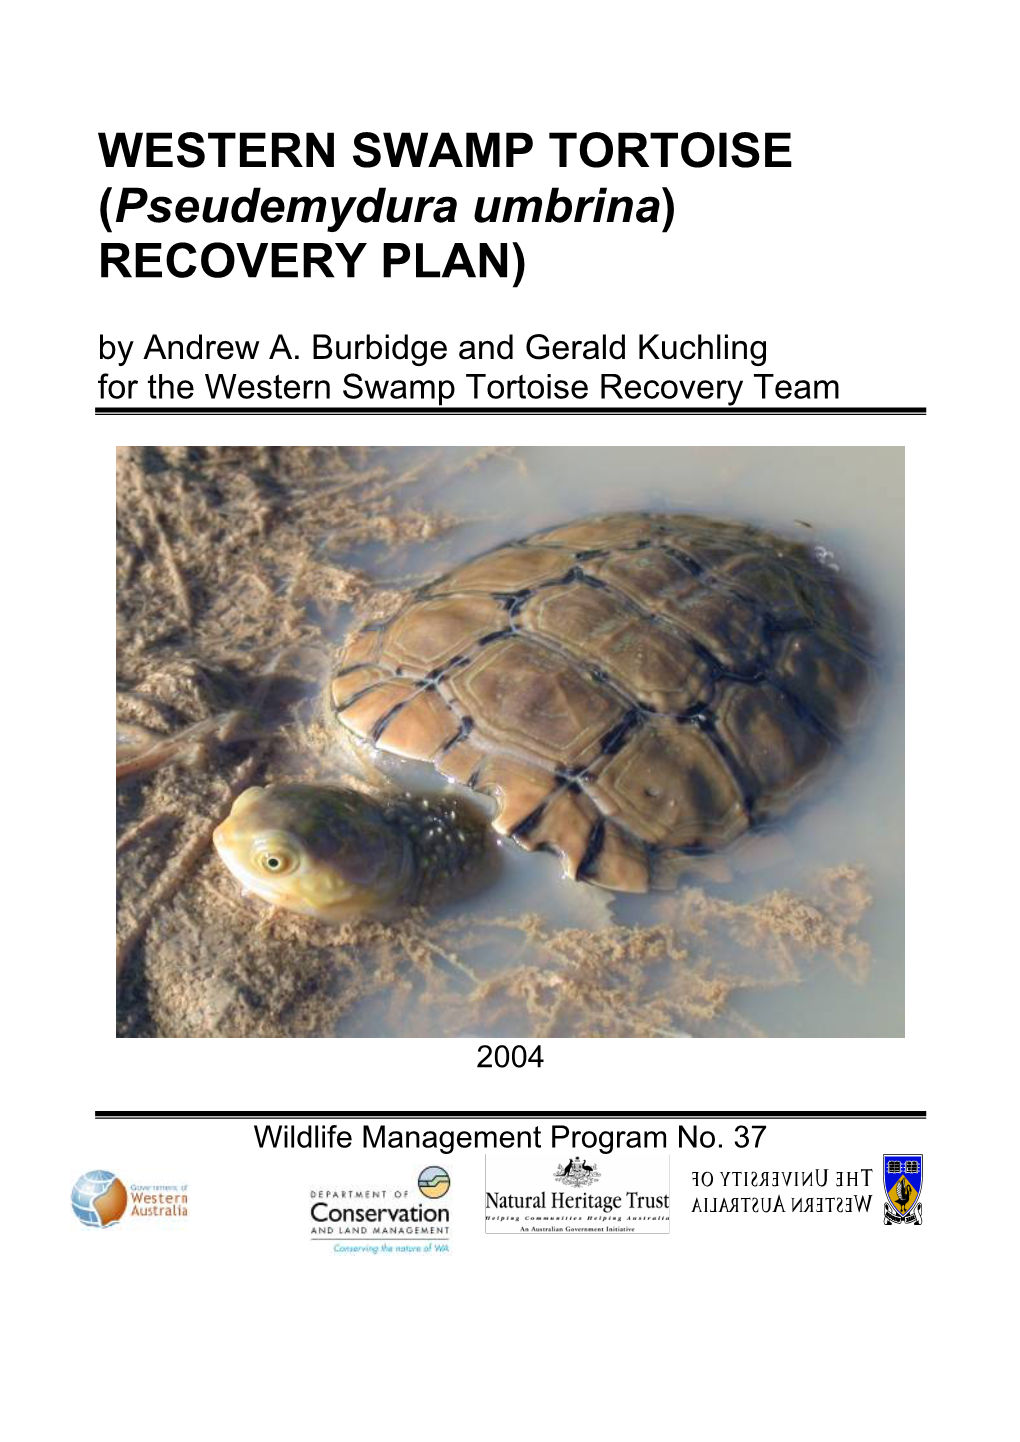 WESTERN SWAMP TORTOISE (Pseudemydura Umbrina) RECOVERY PLAN) by Andrew A